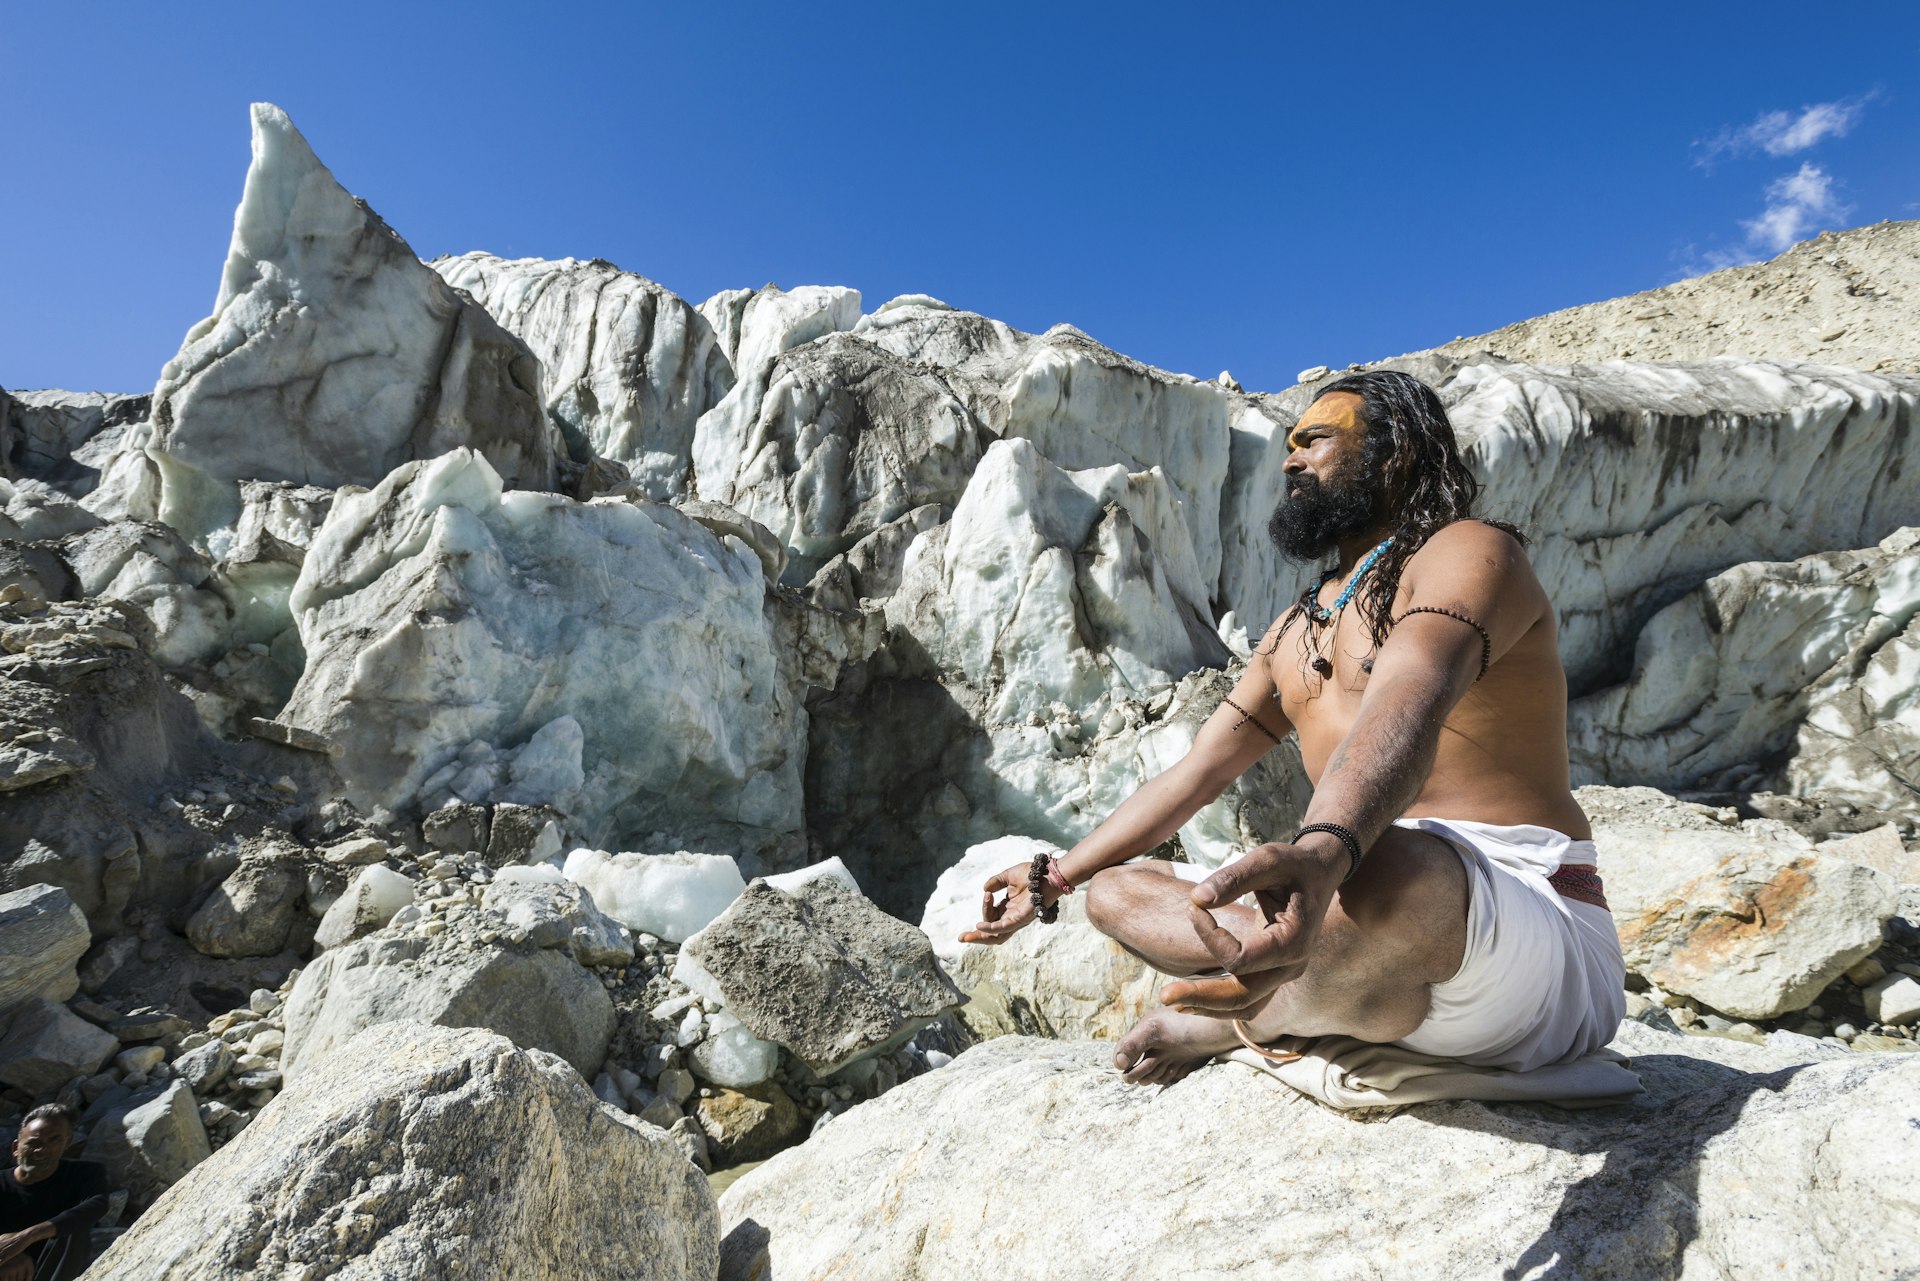 A sadhu (holy man) meditating on a rock at Gaumukh, the source of the holy River Ganges